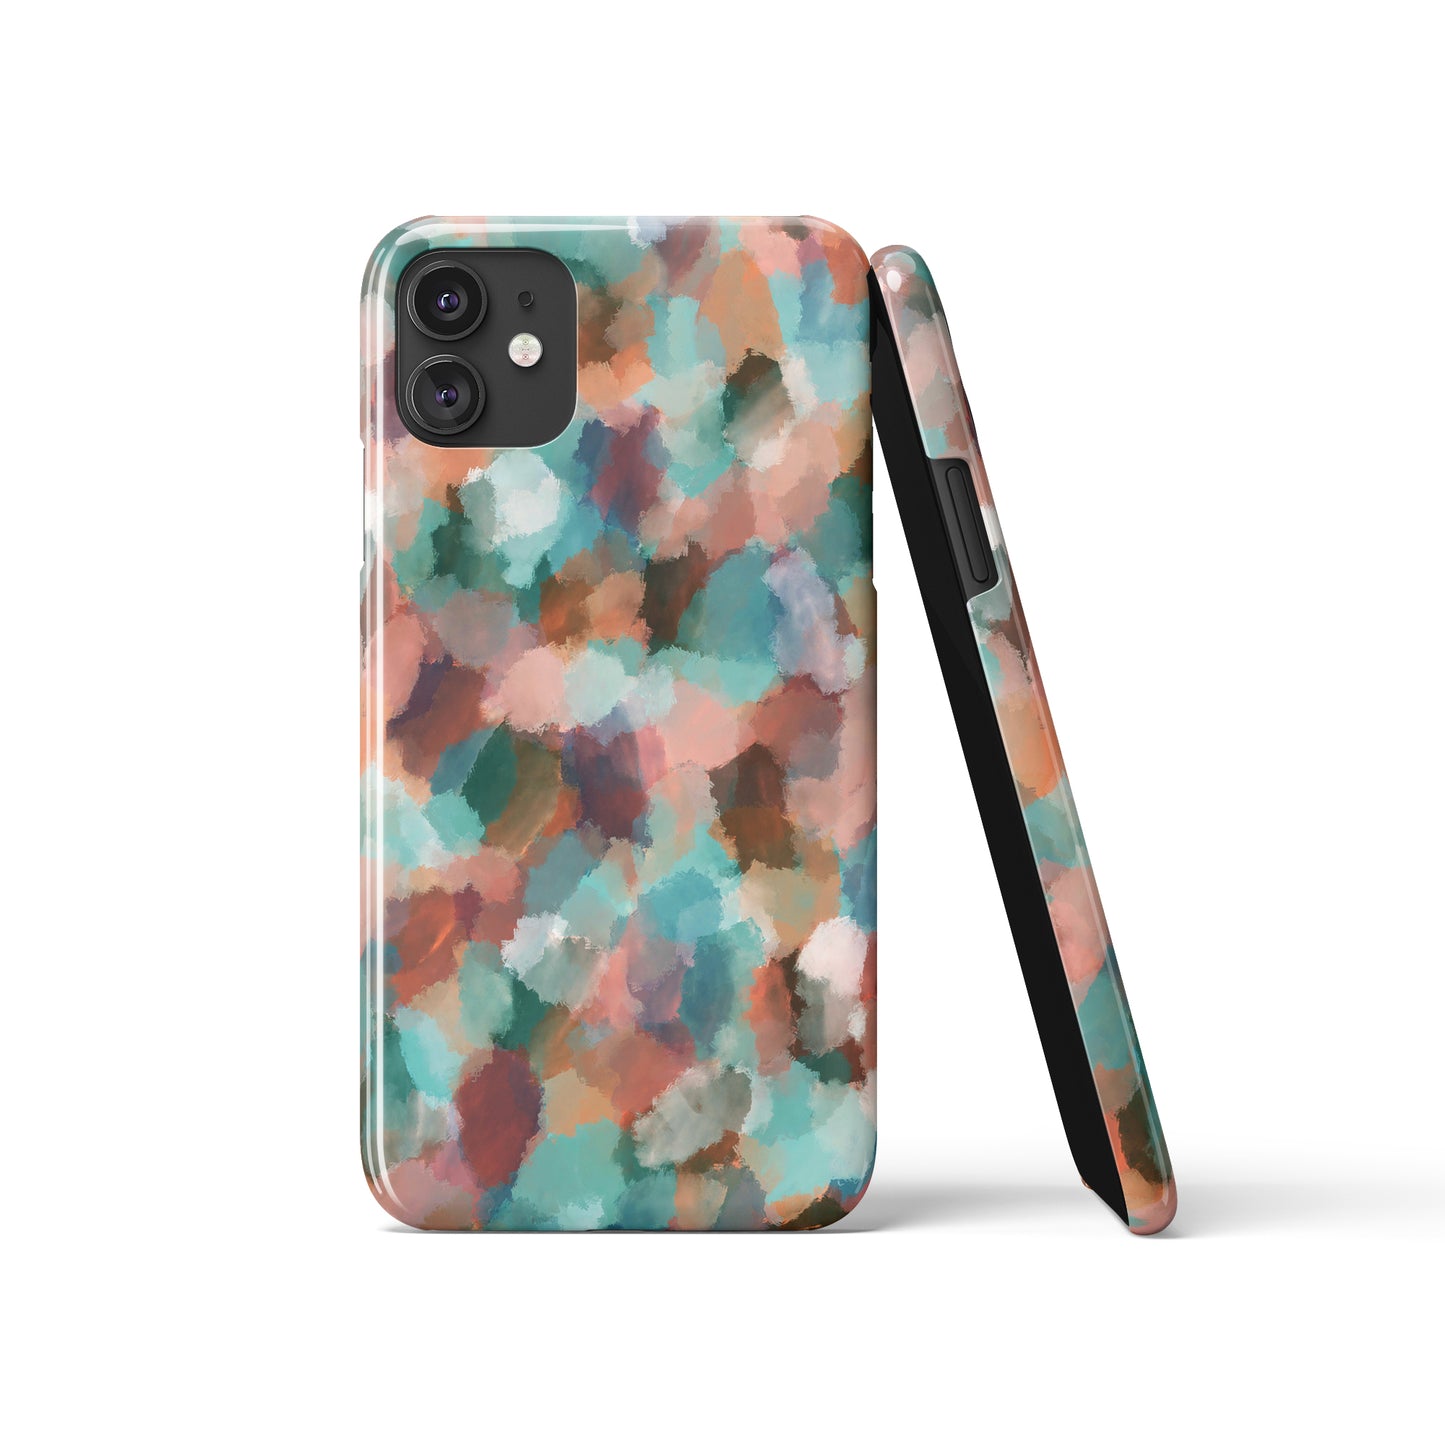 Painted Abstract Autumn Scenery iPhone Case